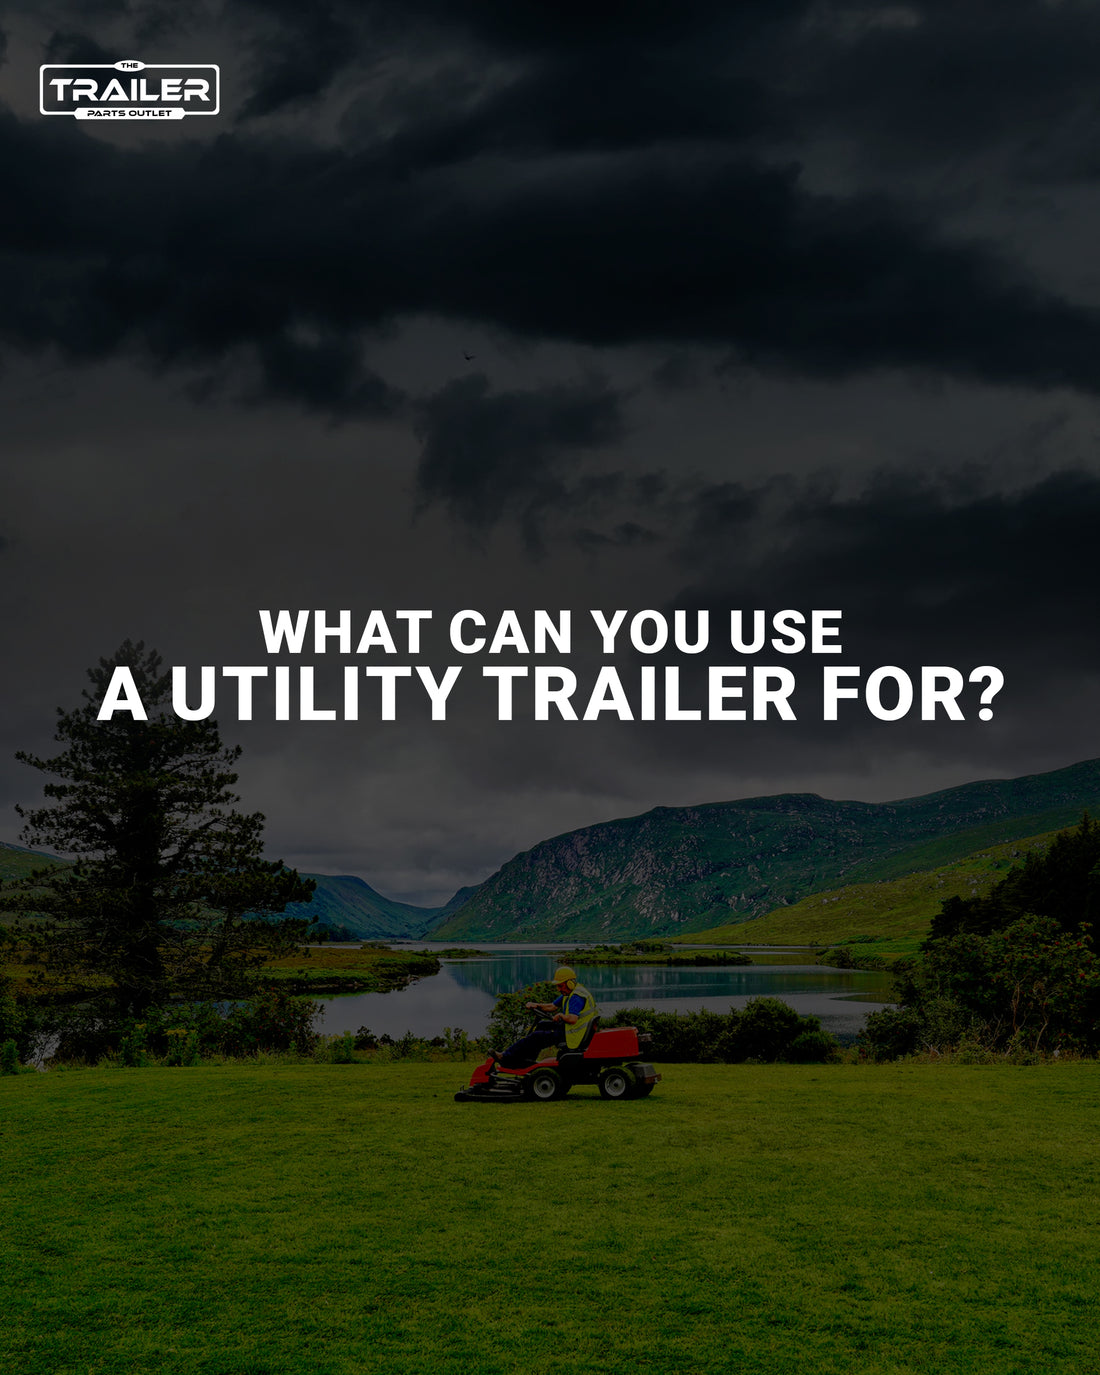 What Can You Use a Utility Trailer For